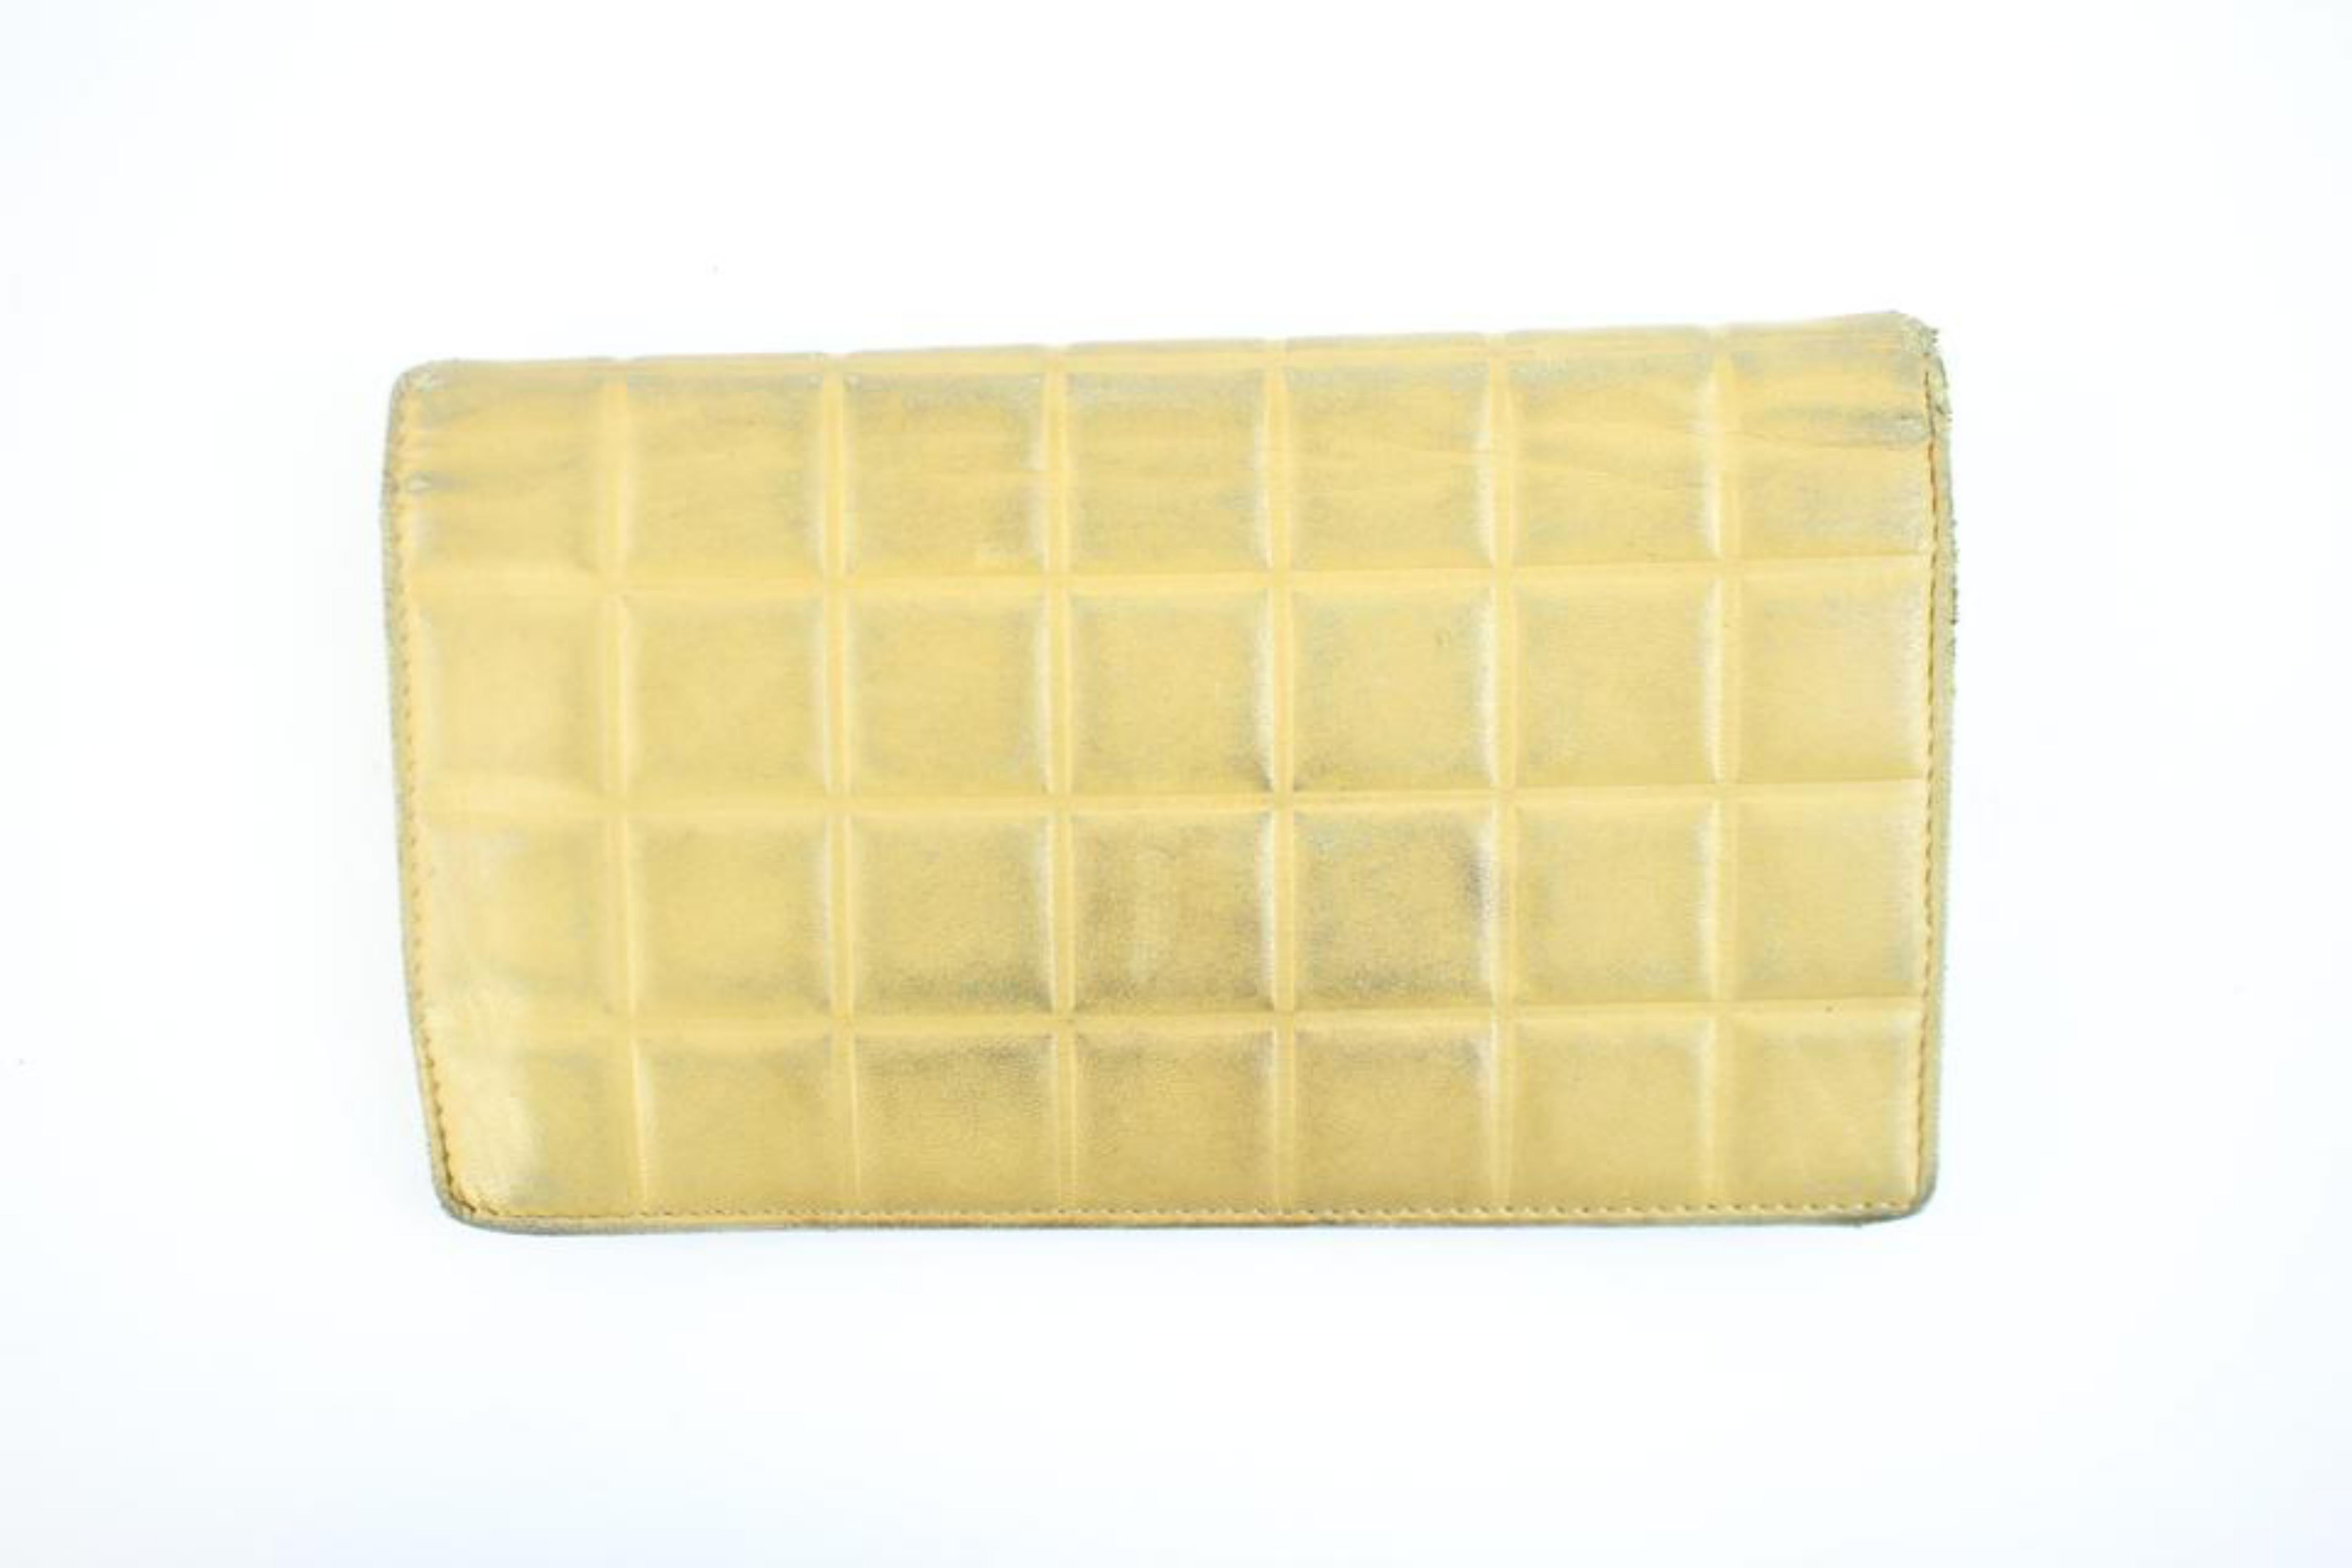 Chanel Beige Quilted Chocolate Bar 30cca41017 Wallet For Sale 7